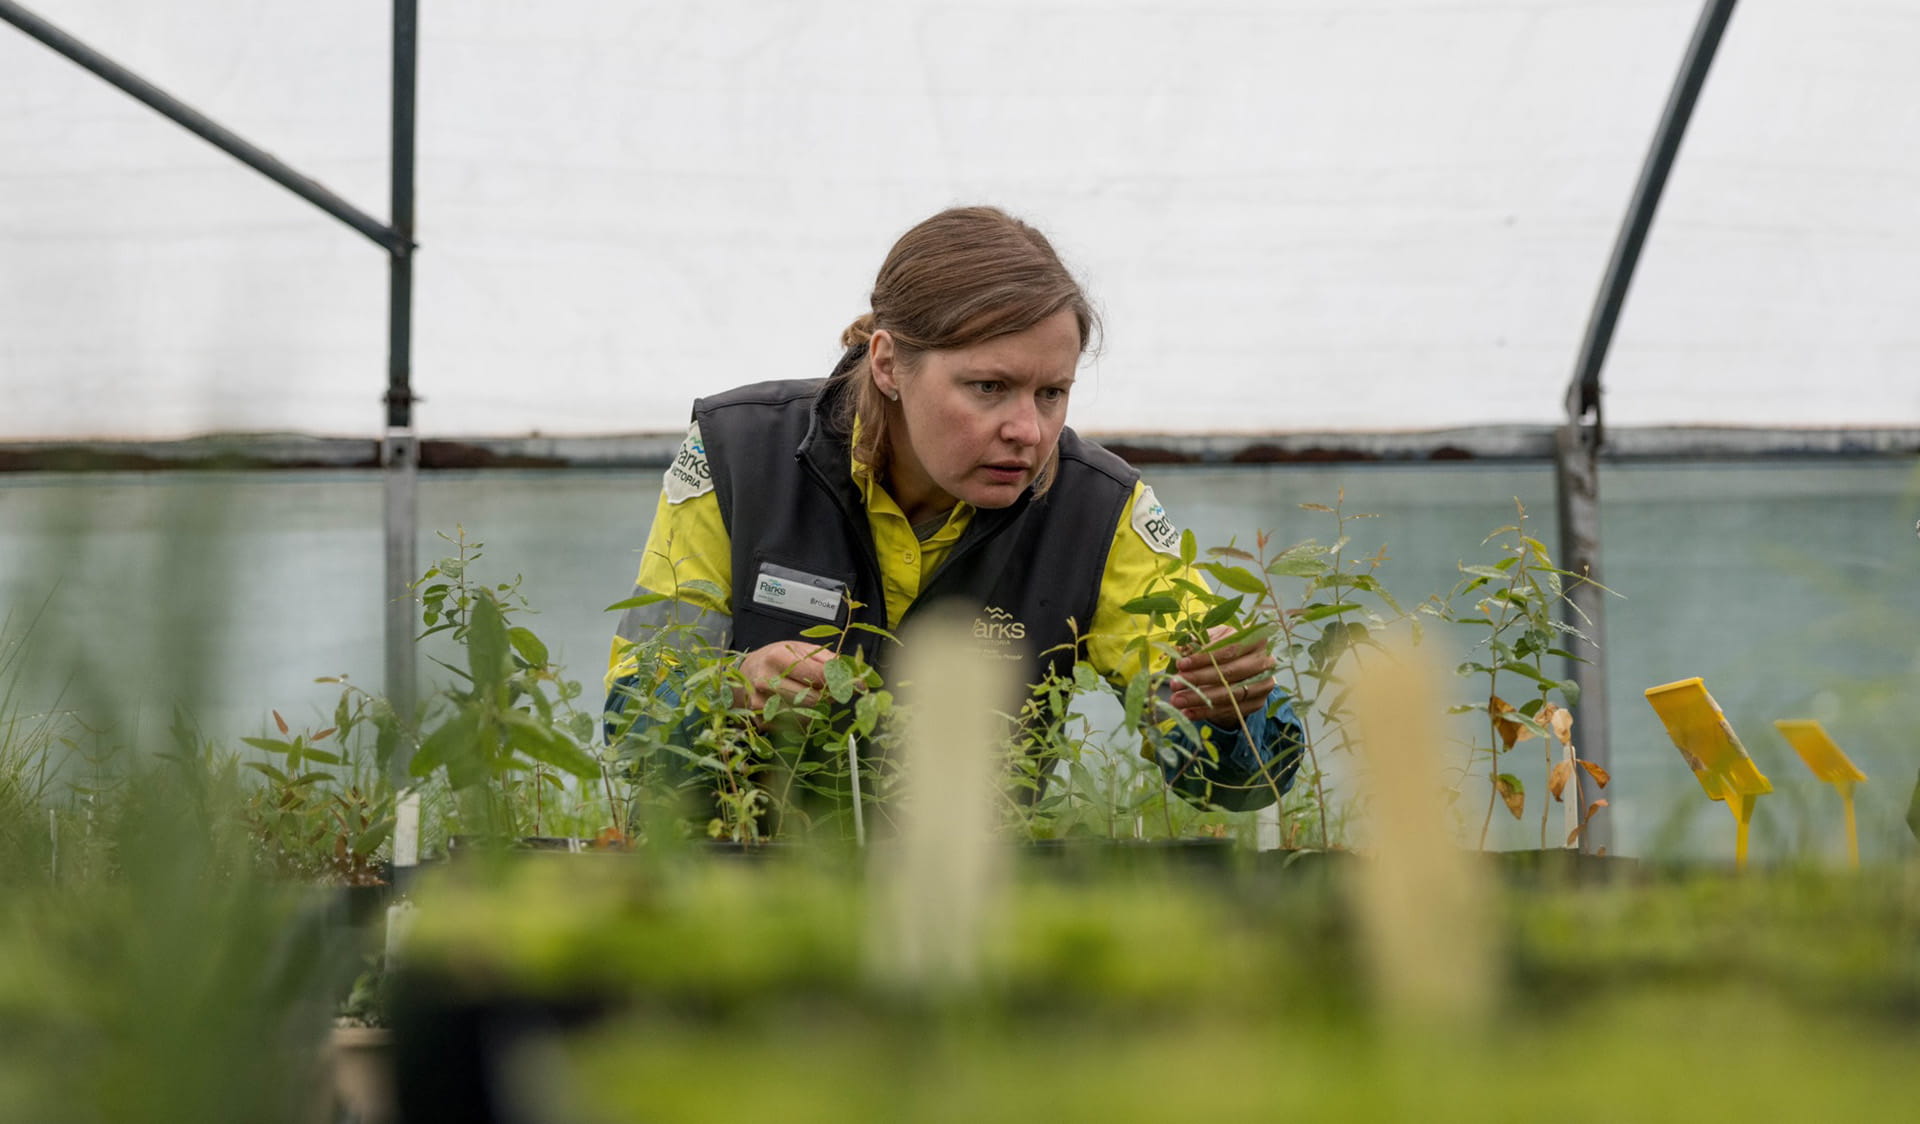 A scientist examines seedlings in a greenhouse